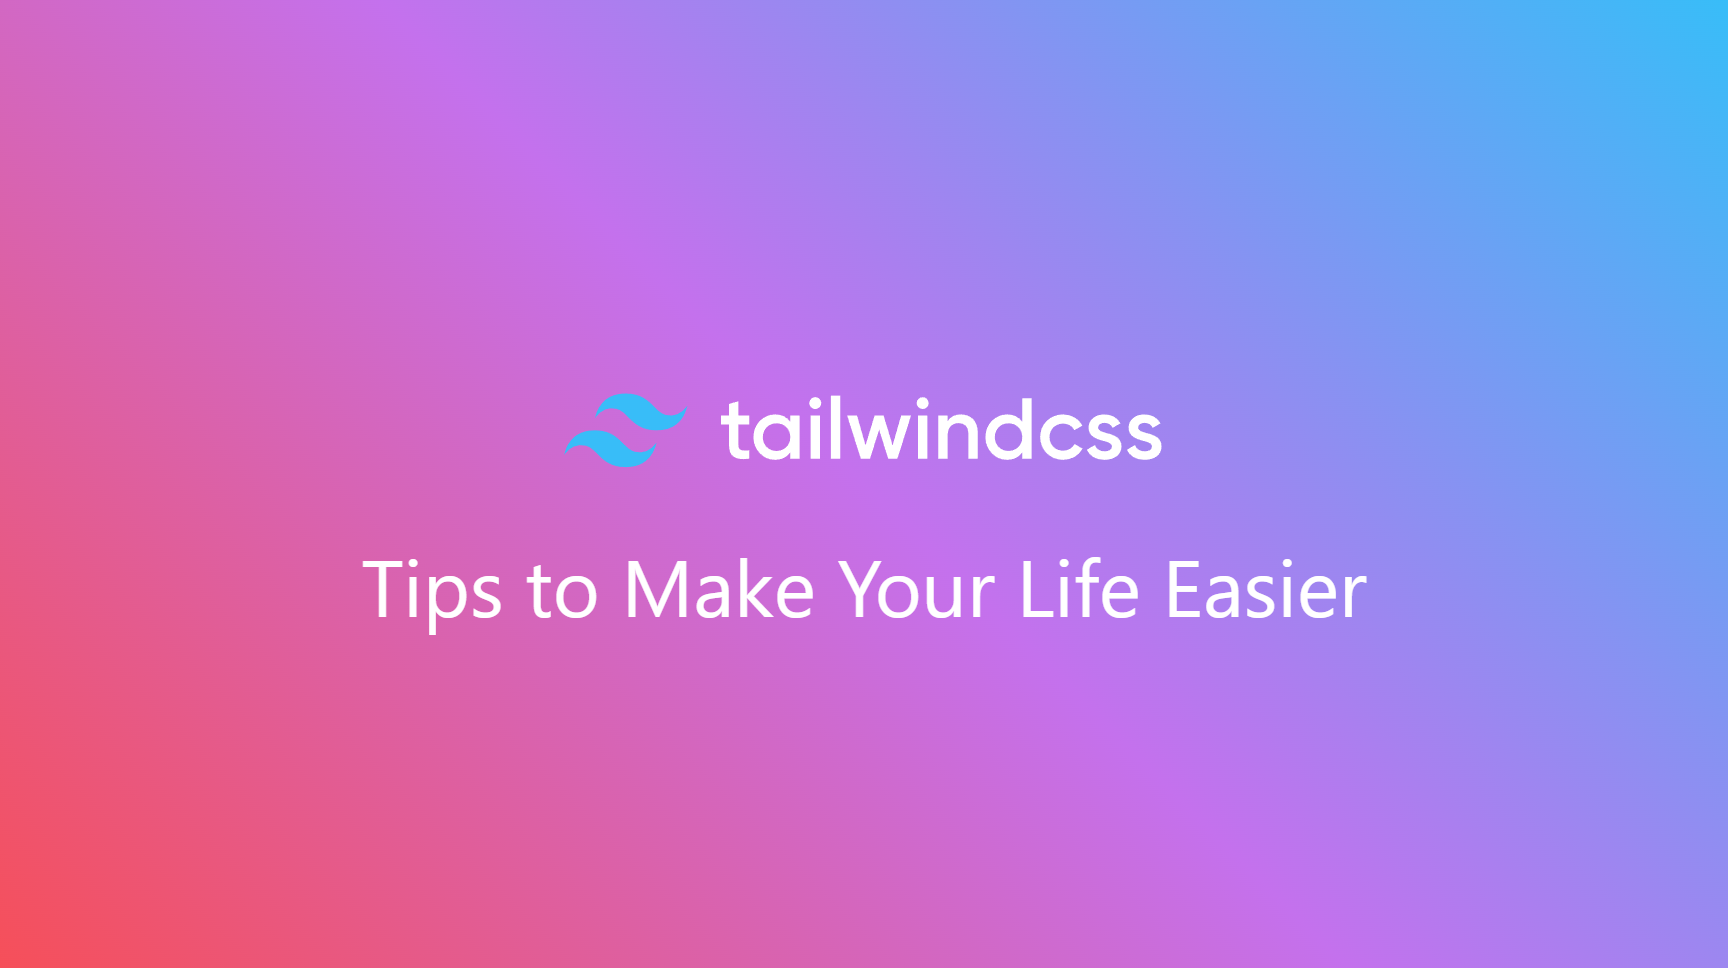 Tailwind CSS Tips to Make Your Life Easier